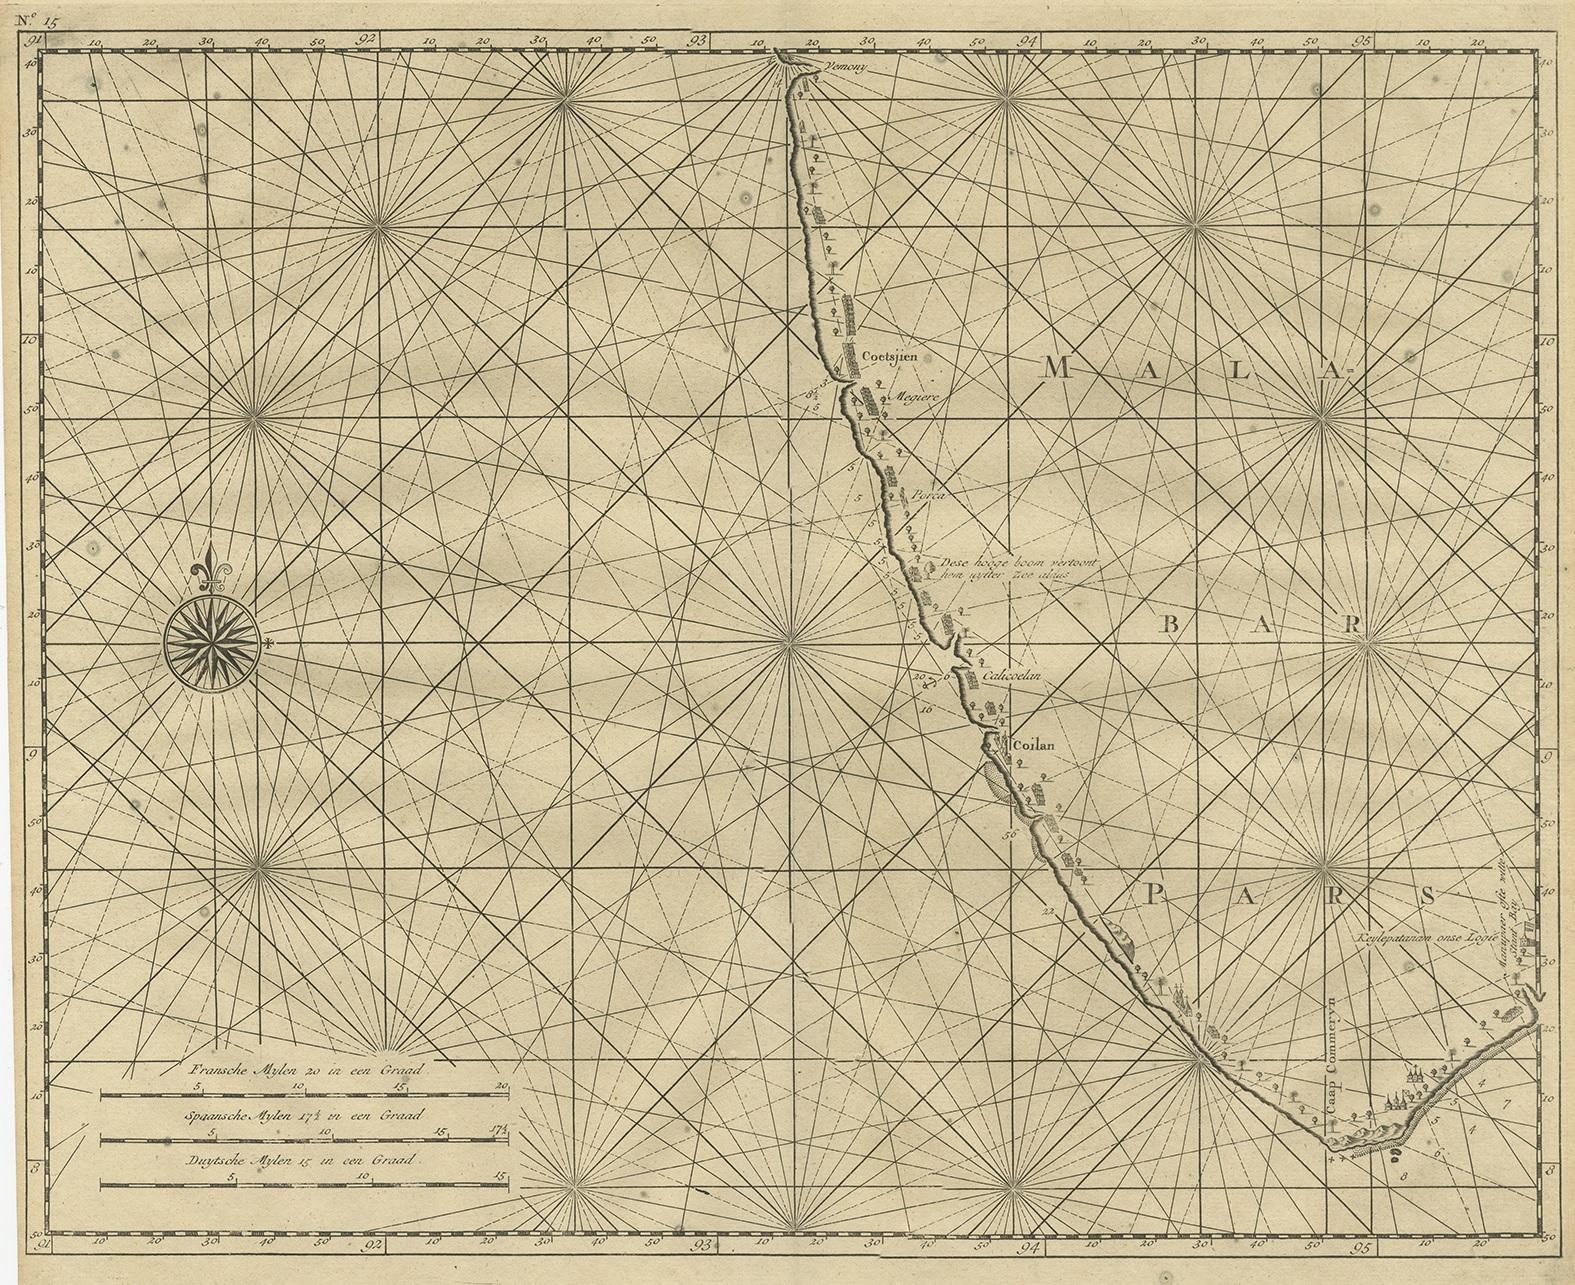 Untitled sea chart of the coast of Malabar, India. This print originates from 'Oud en Nieuw Oost-Indiën' by F. Valentijn.